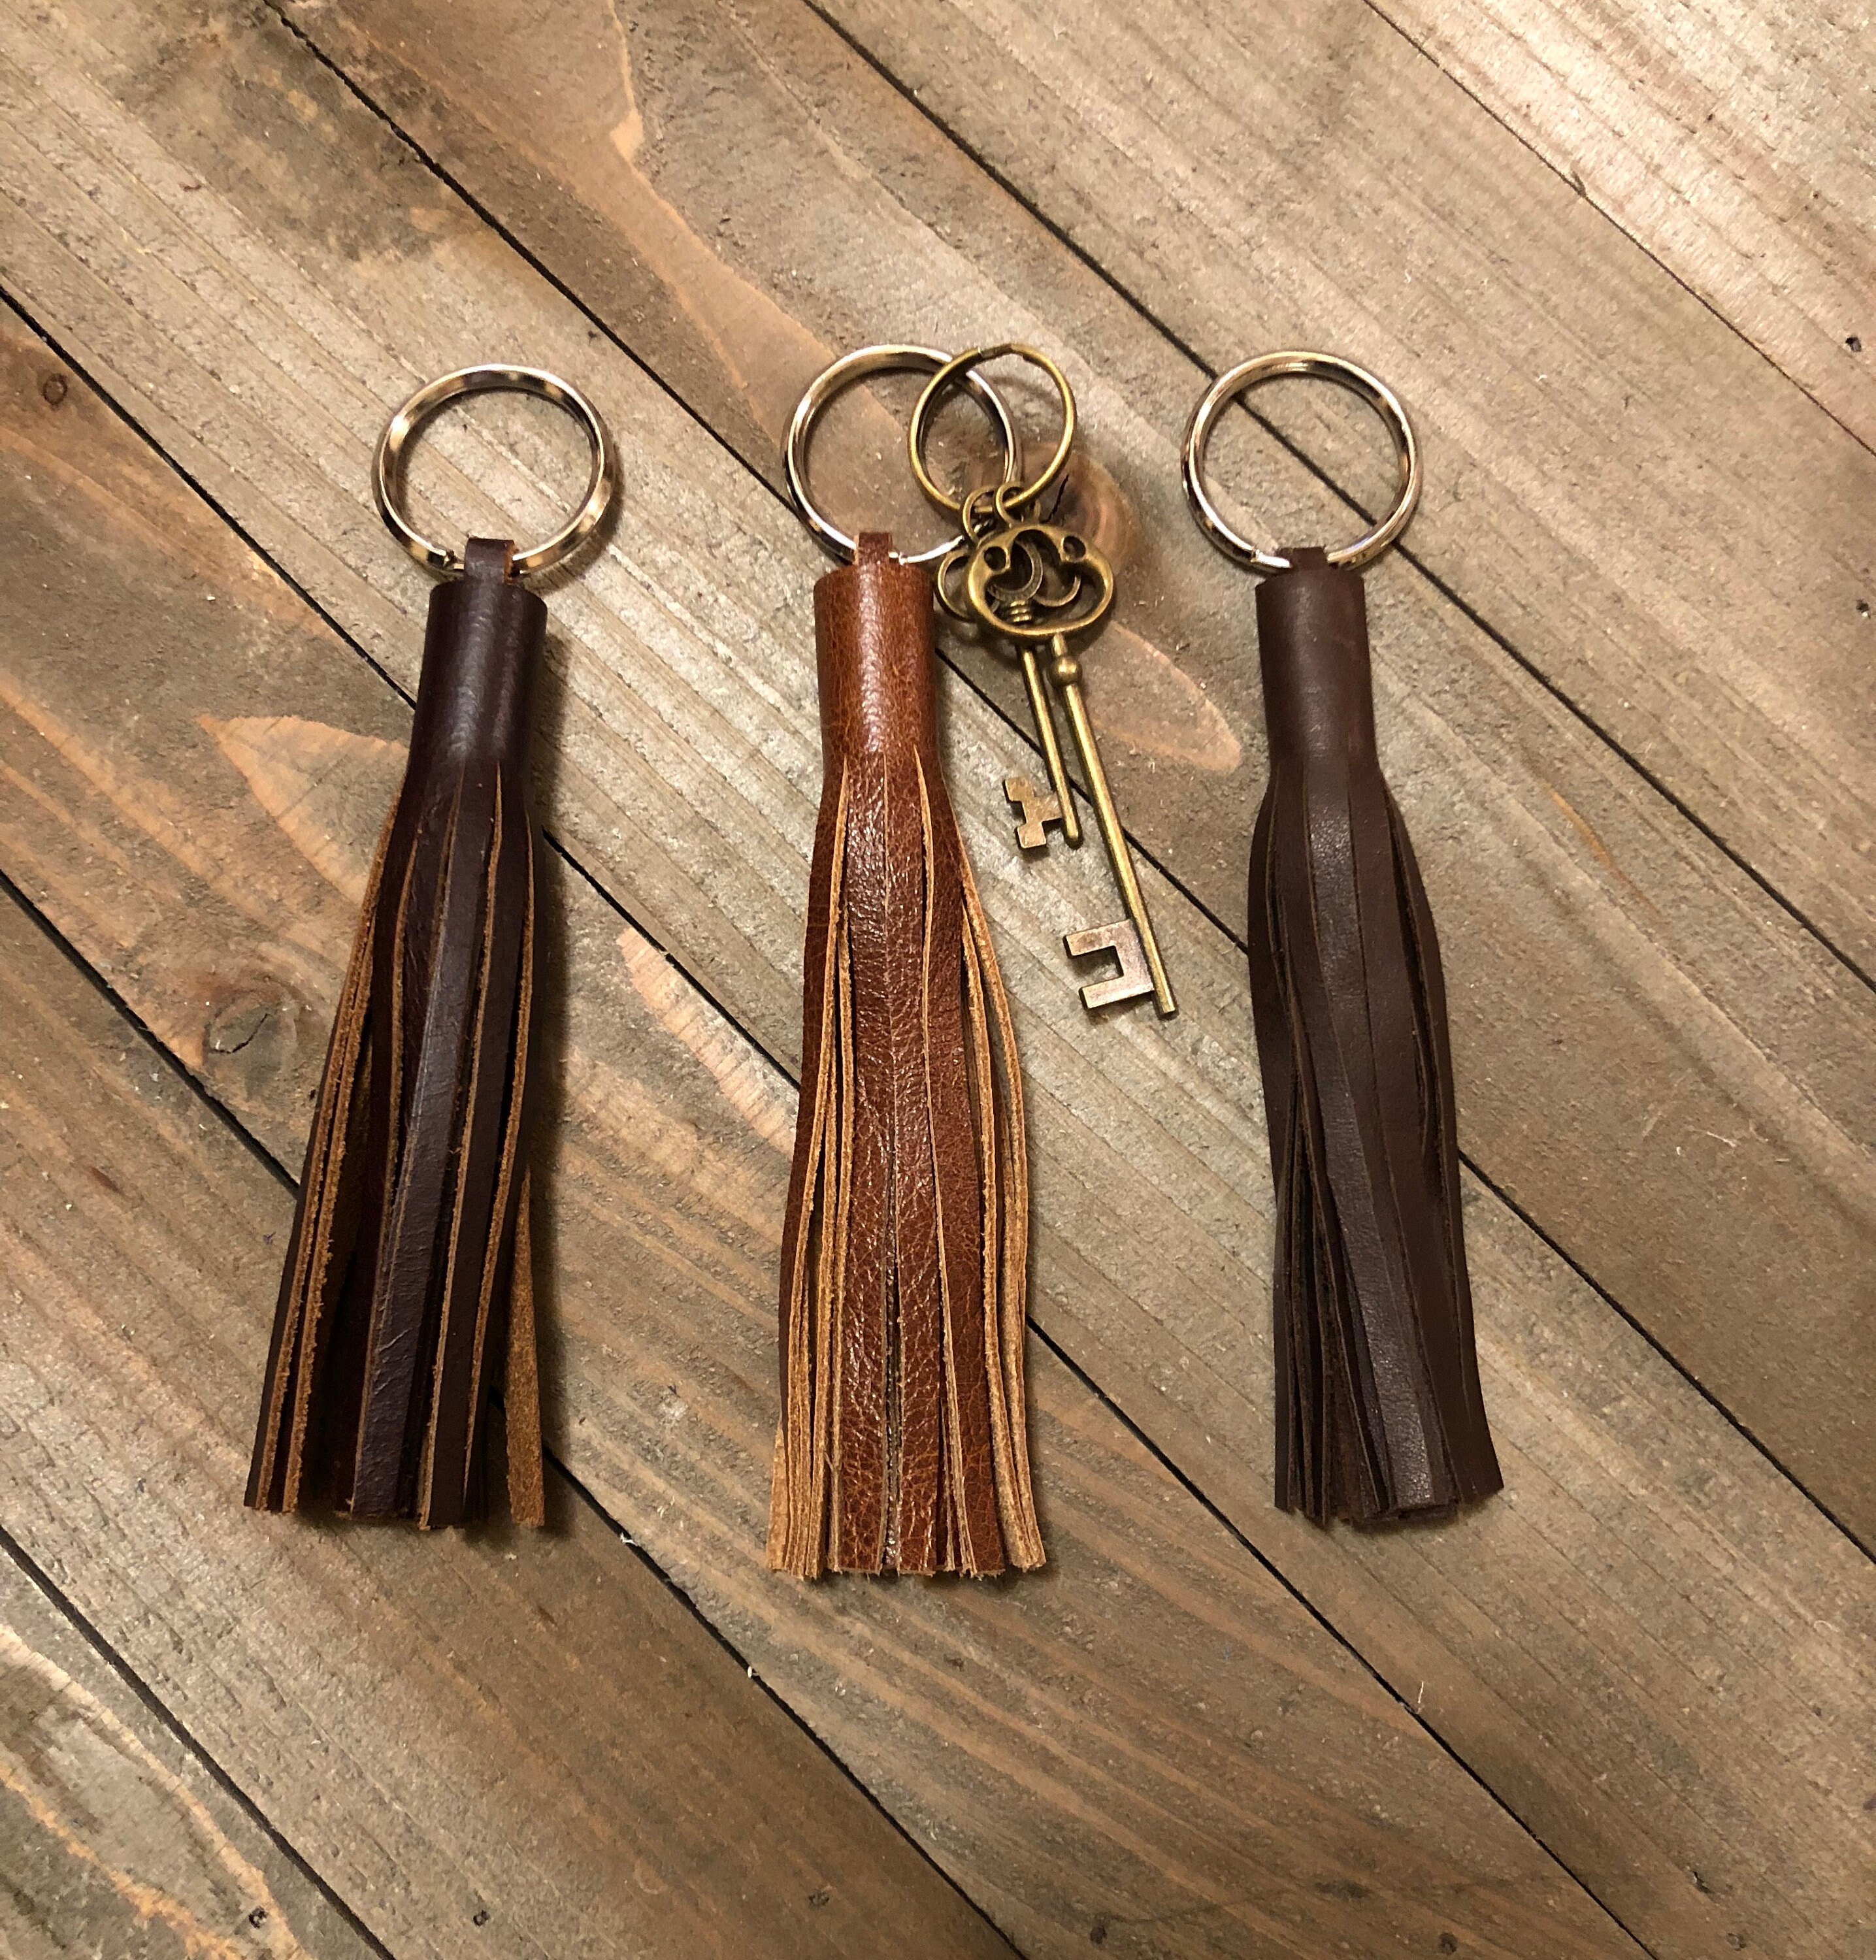 Ethically Crafted Sustainable Leather / Leather Tassel for Bag / Dark Brown / Genuine Full Grain Leather / Parker Clay